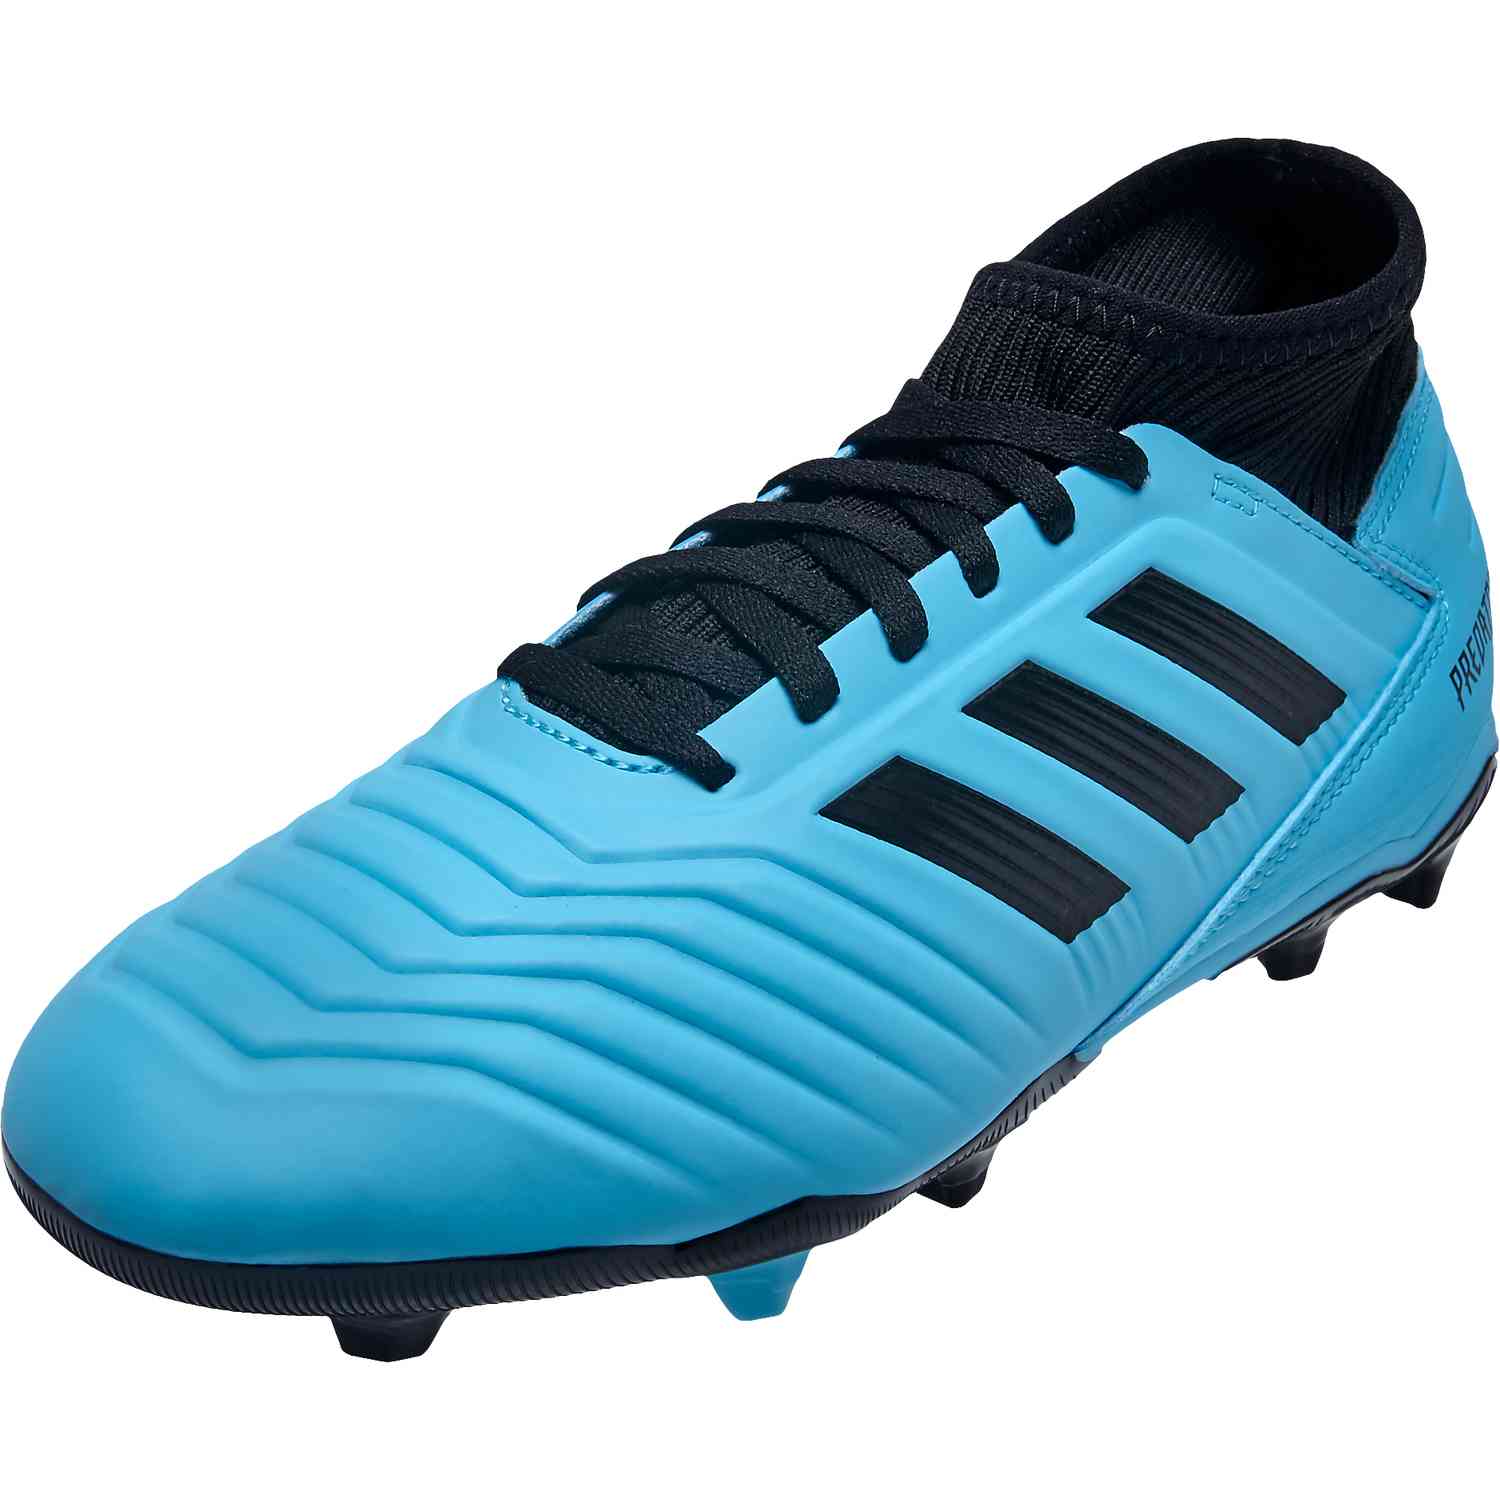 predator youth soccer cleats